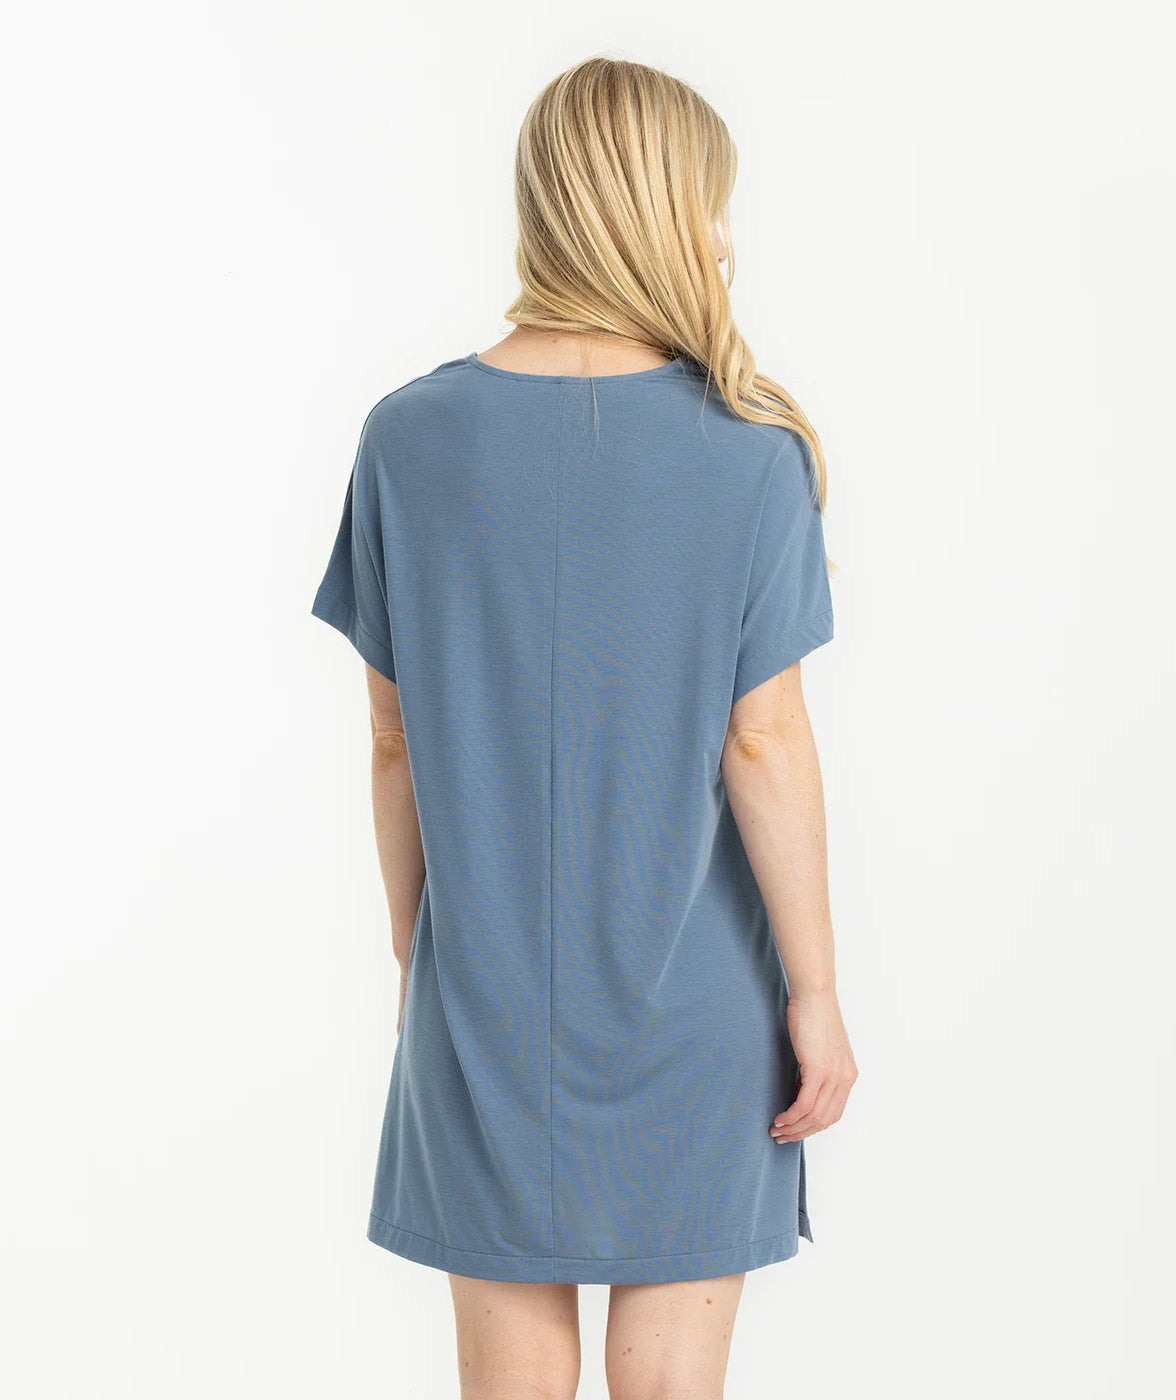 Free Fly: Women's Elevate V-Neck Cover-Up